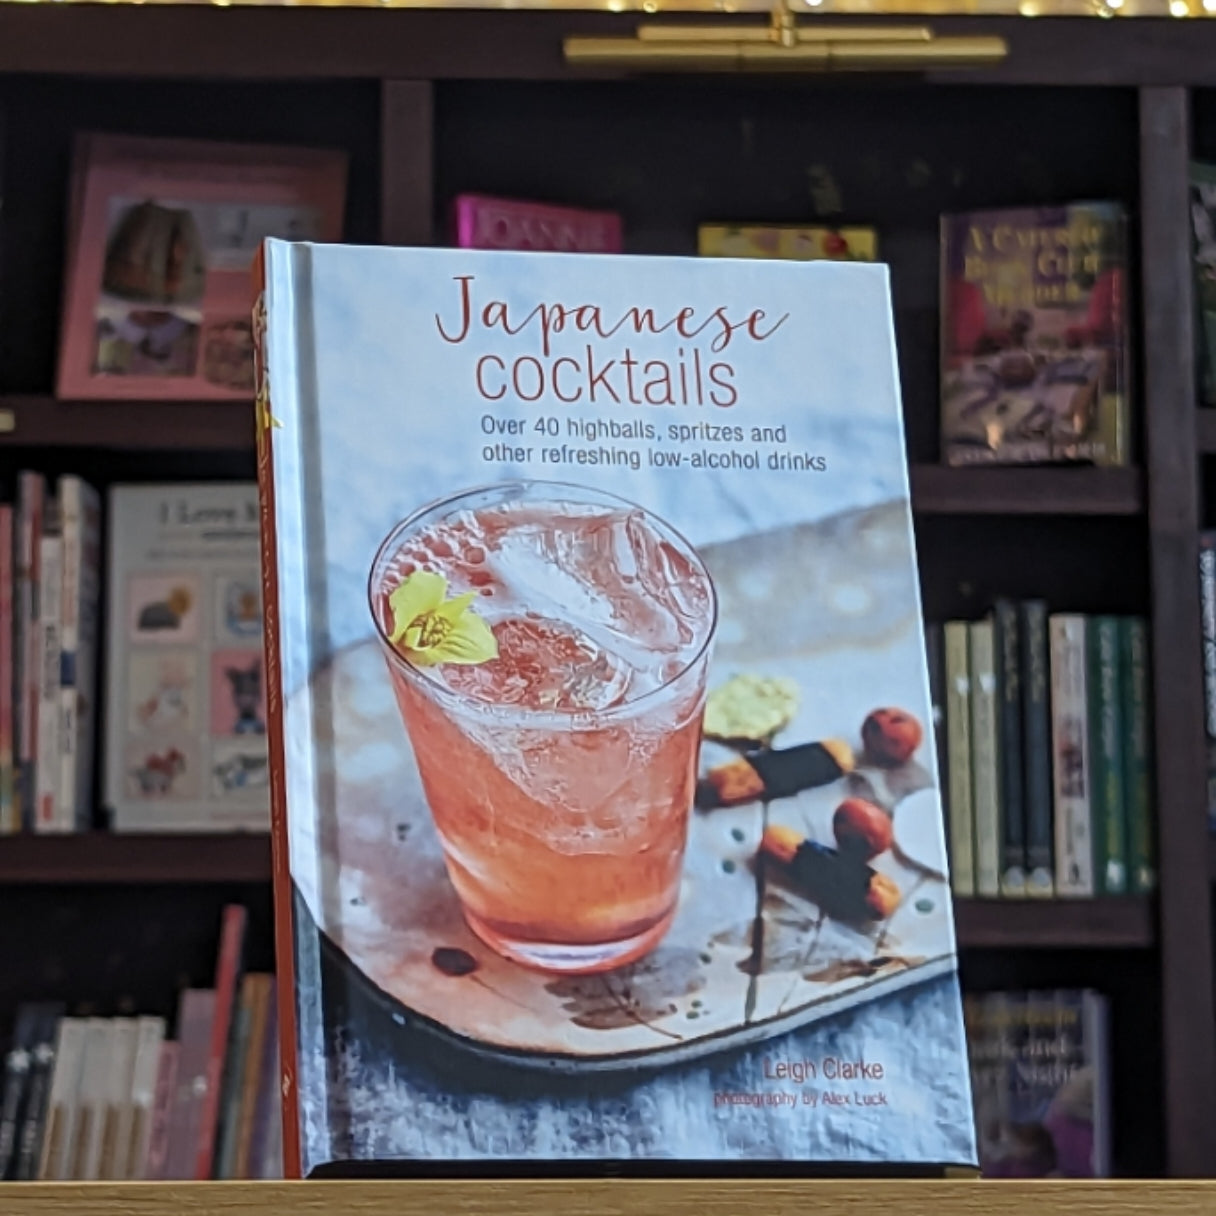 Japanese Cocktails: Over 40 highballs, spritzes and other refreshing low-alcohol drinks